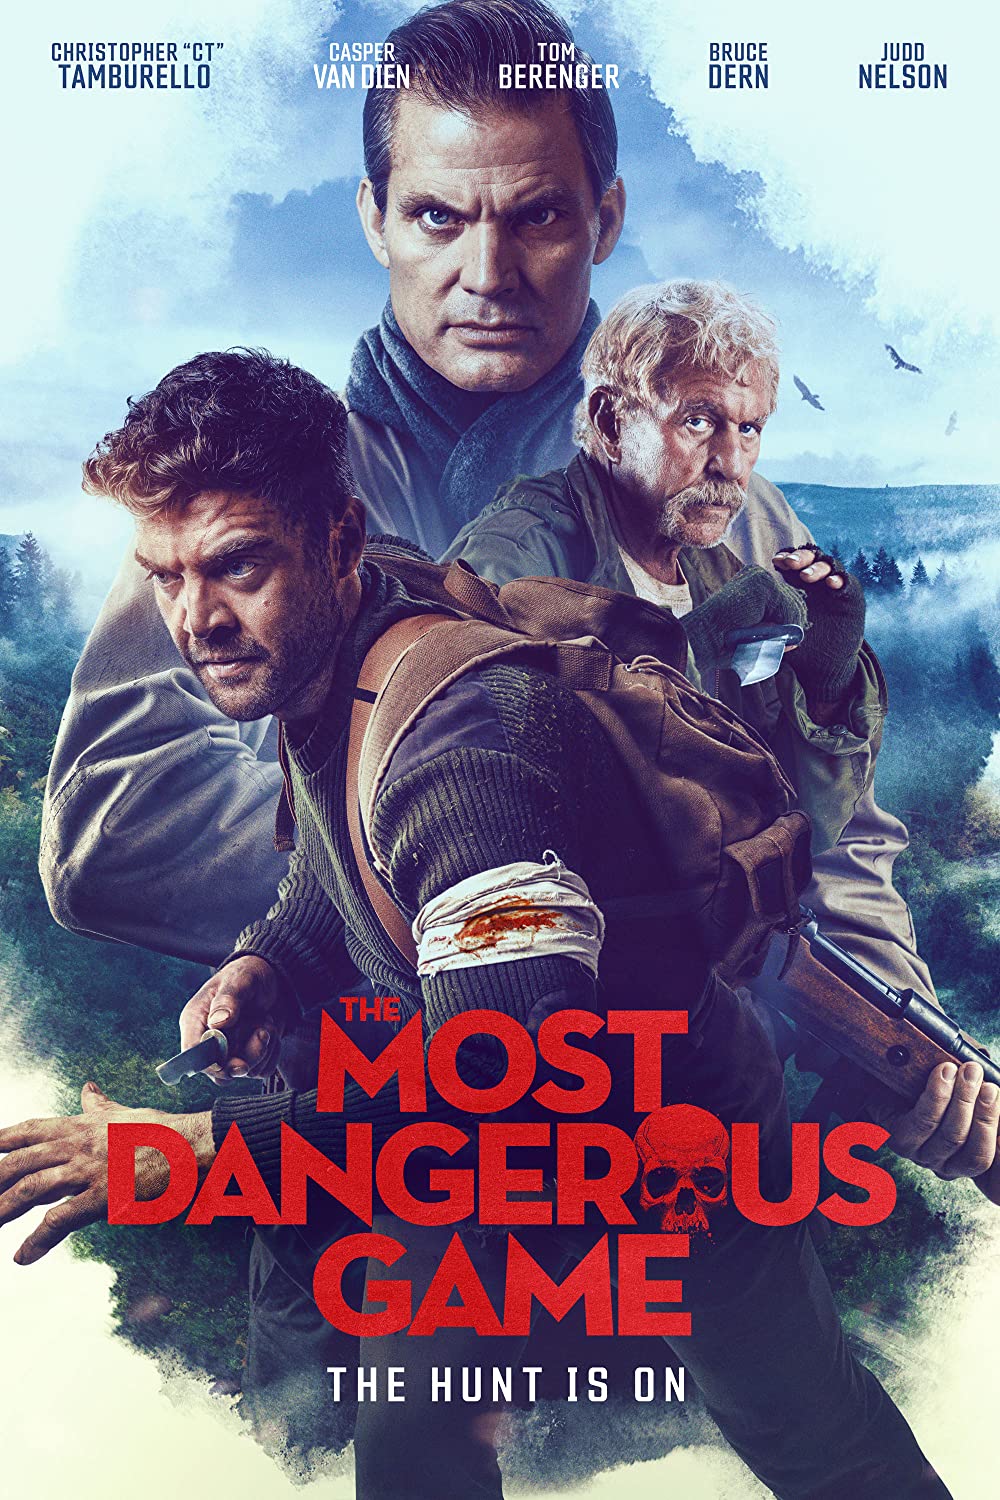 The Most Dangerous Game 2022 English 720p | 480p HDRip ESub 800MB | 300MB Download